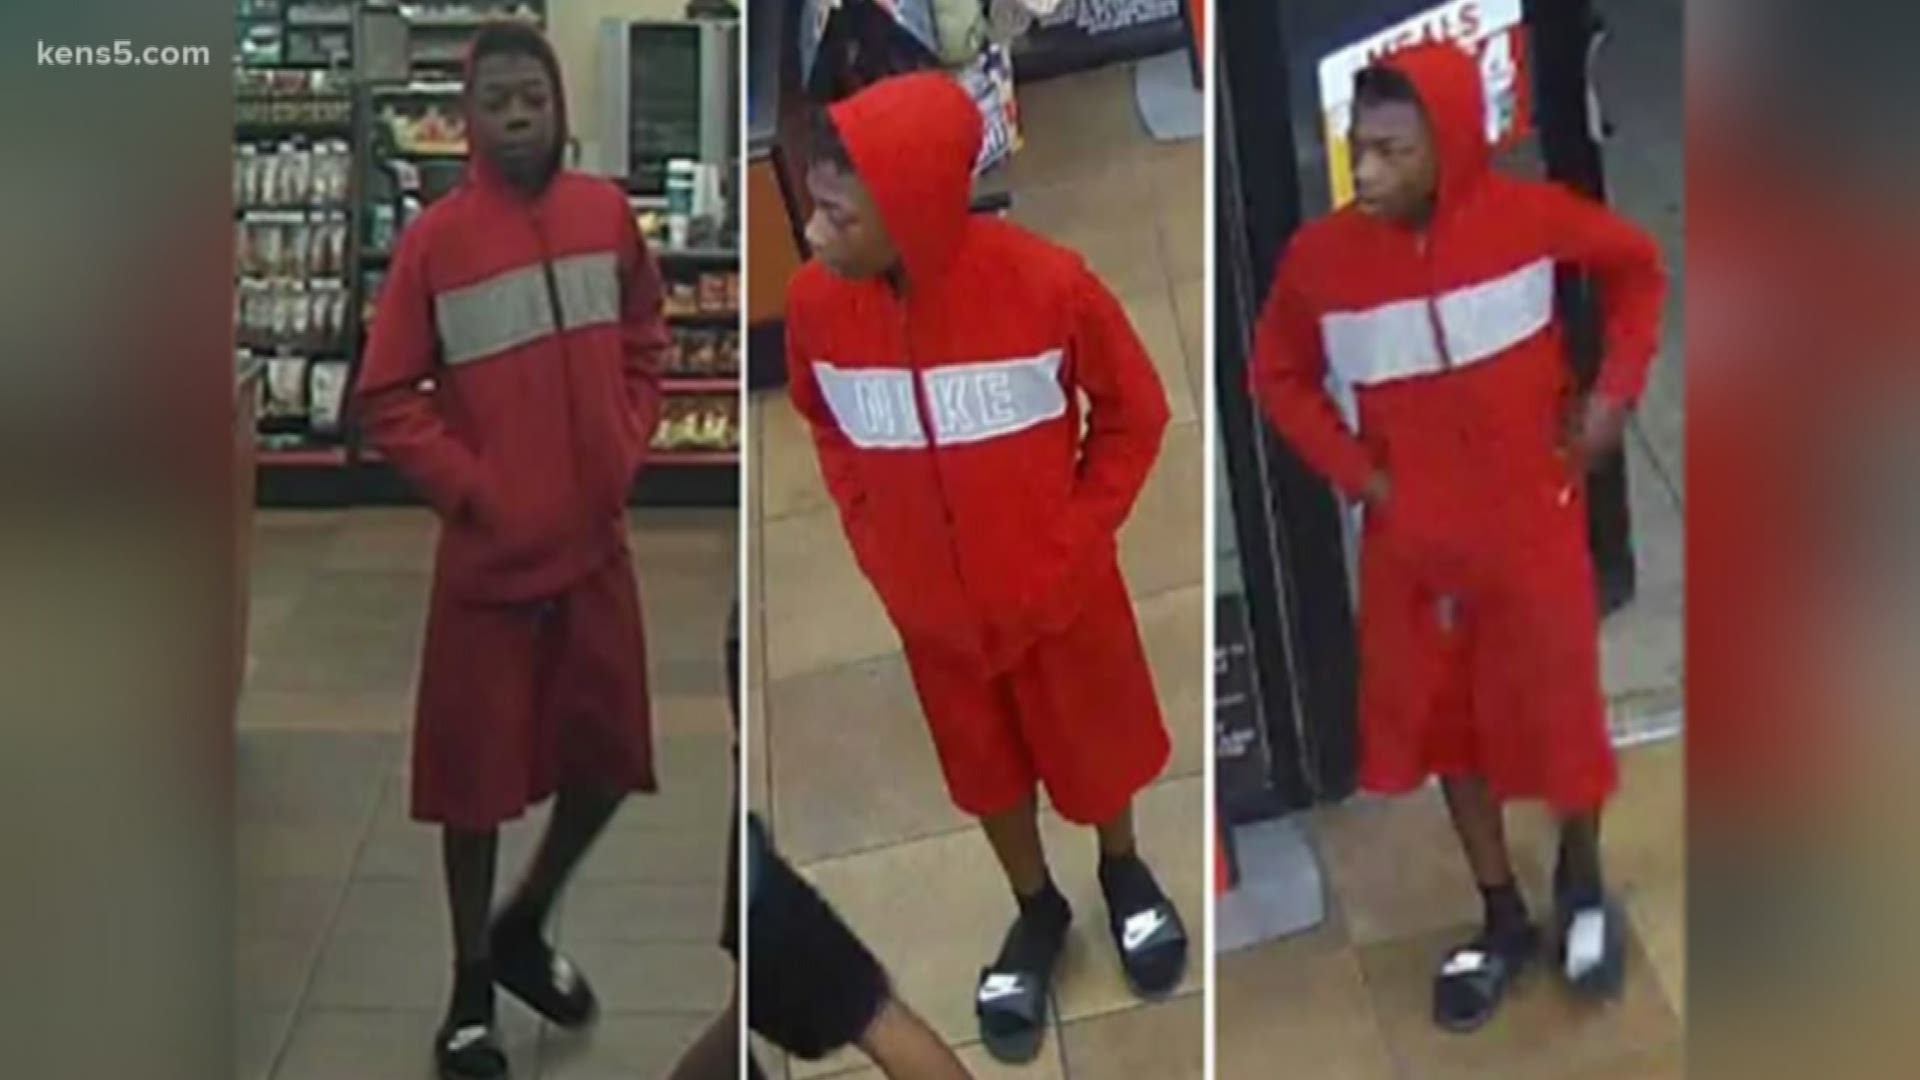 The San Antonio Police Department and Crime Stoppers need your help in identifying a suspect who allegedly pointed a gun at a store clerk, threatening to shoot him. A reward of up to $5,000 may be offered for information leading to an arrest.